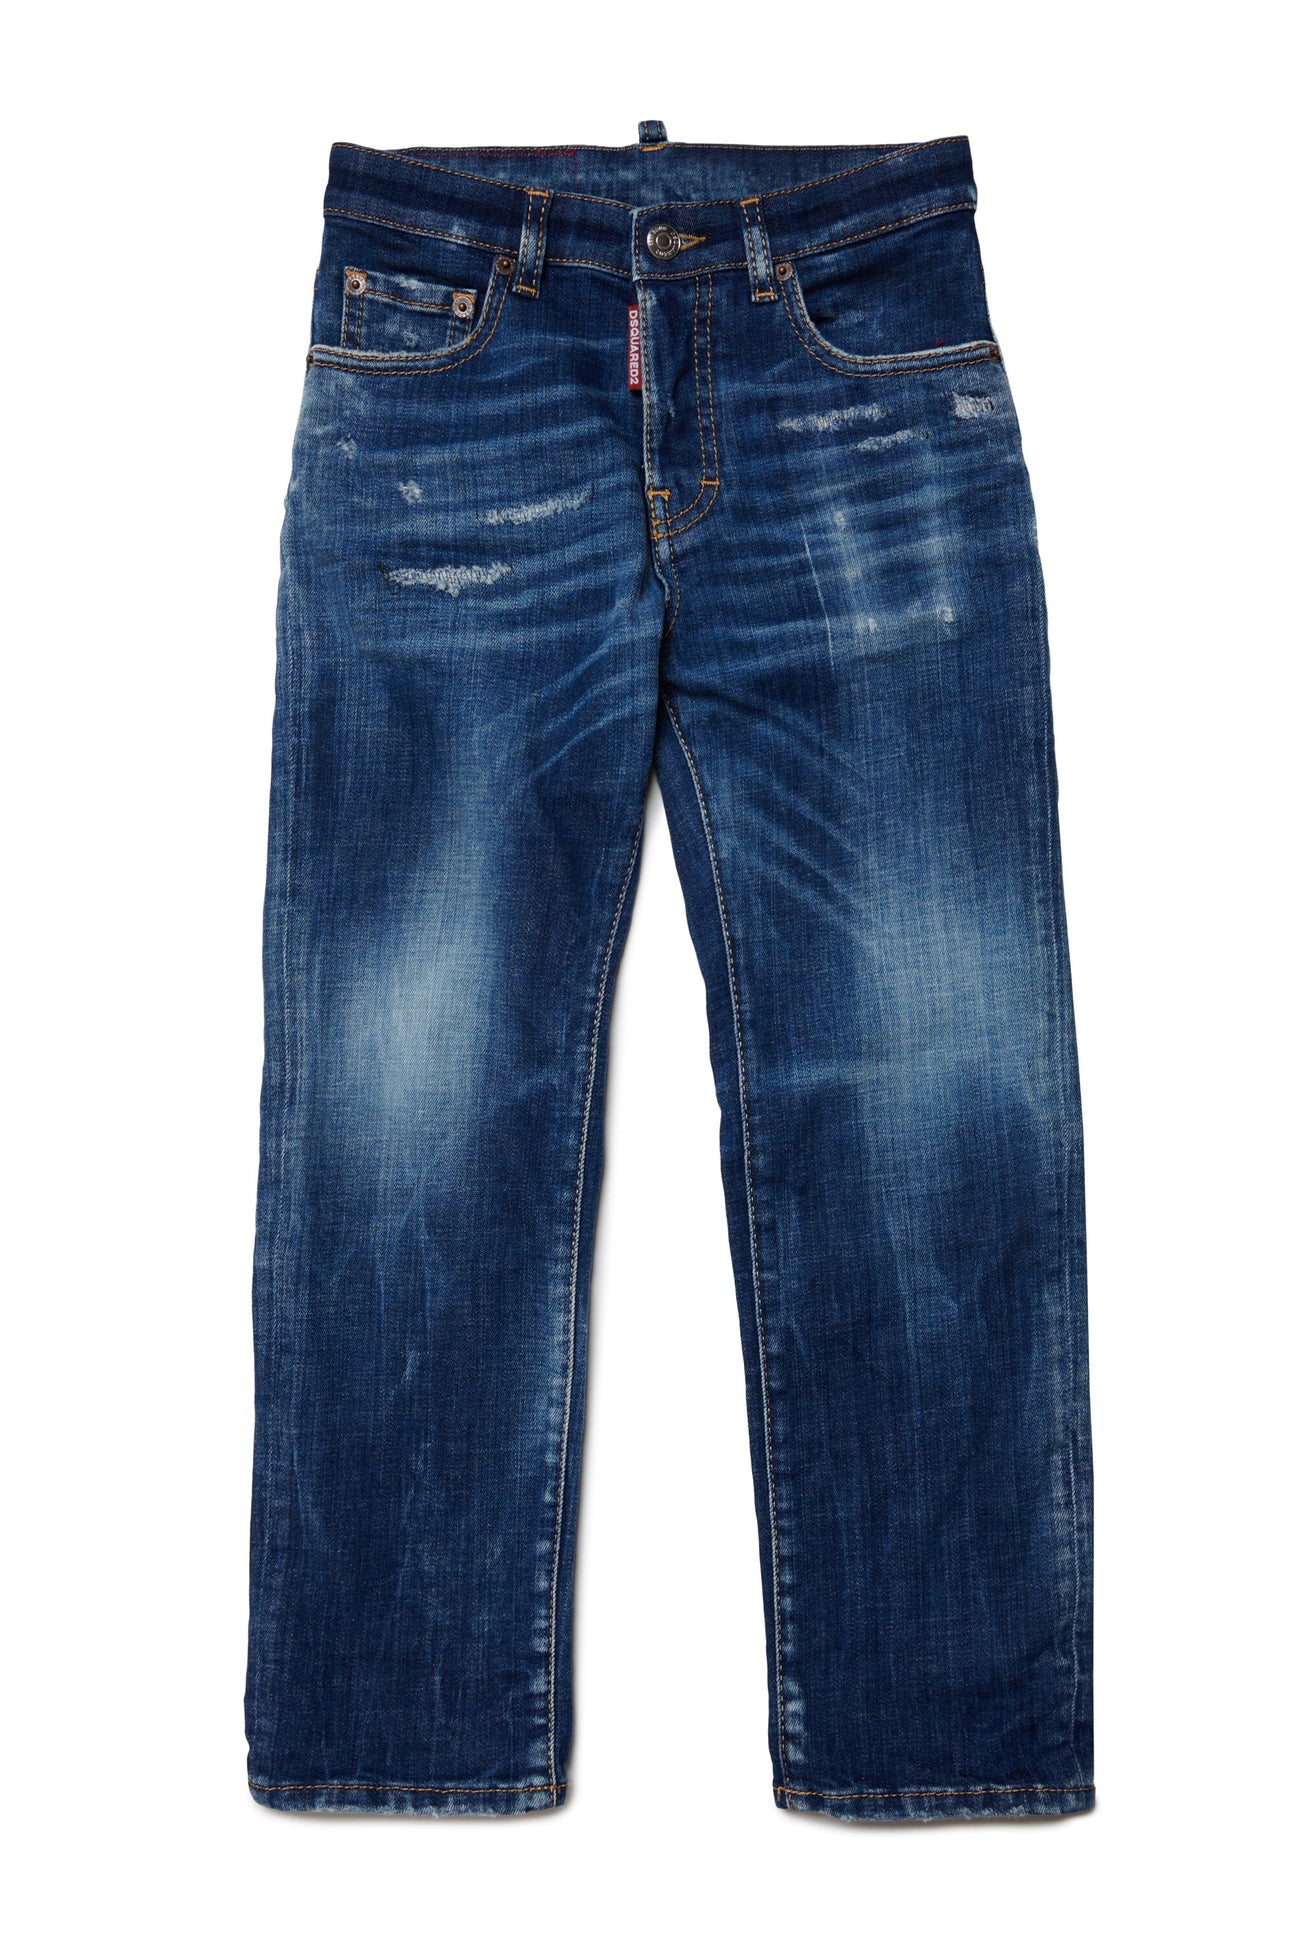 Shaded blue straight jeans with breaks - 642 Jean 